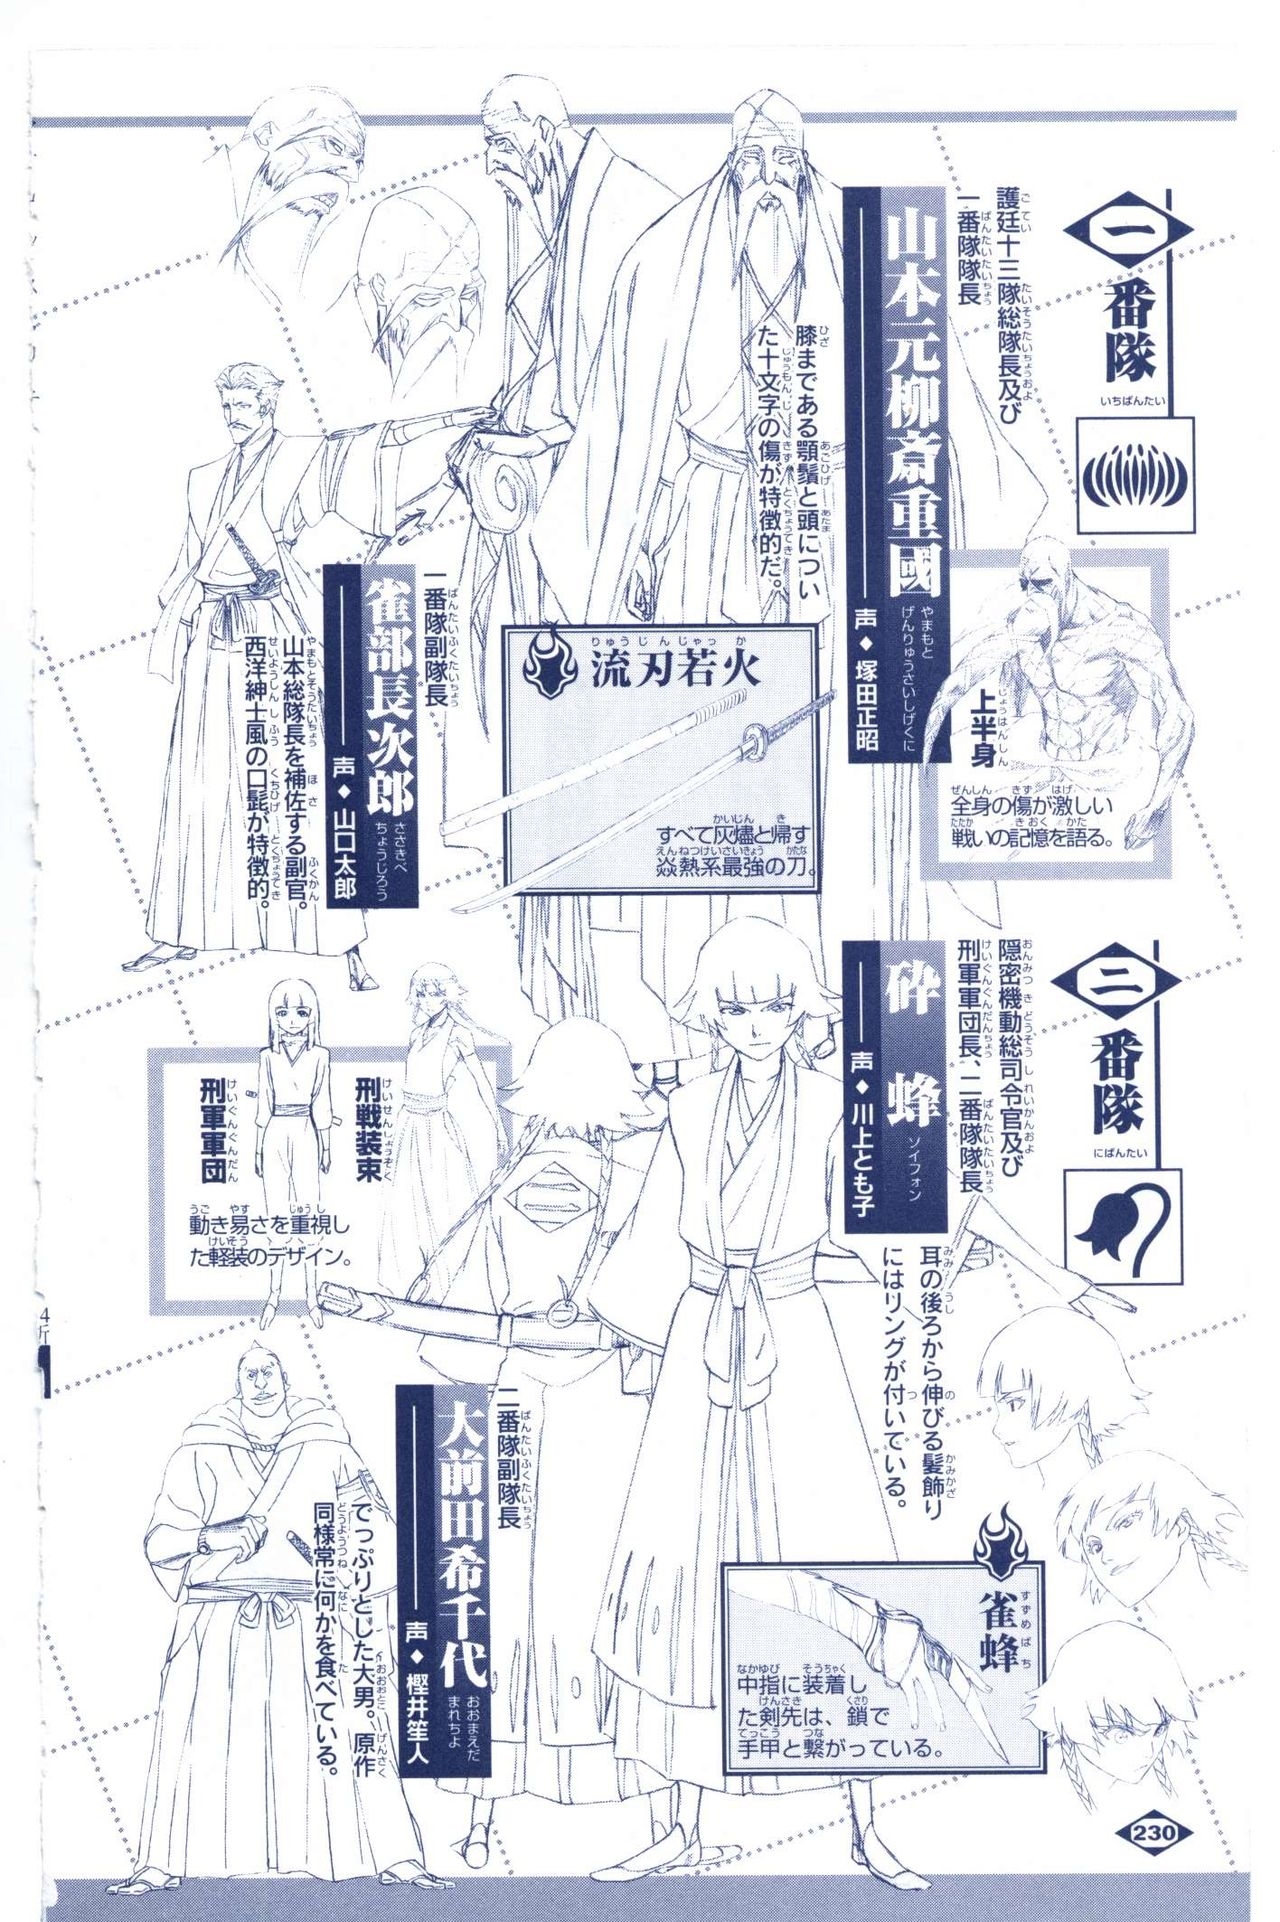 Bleach: Official Animation Book VIBEs 230